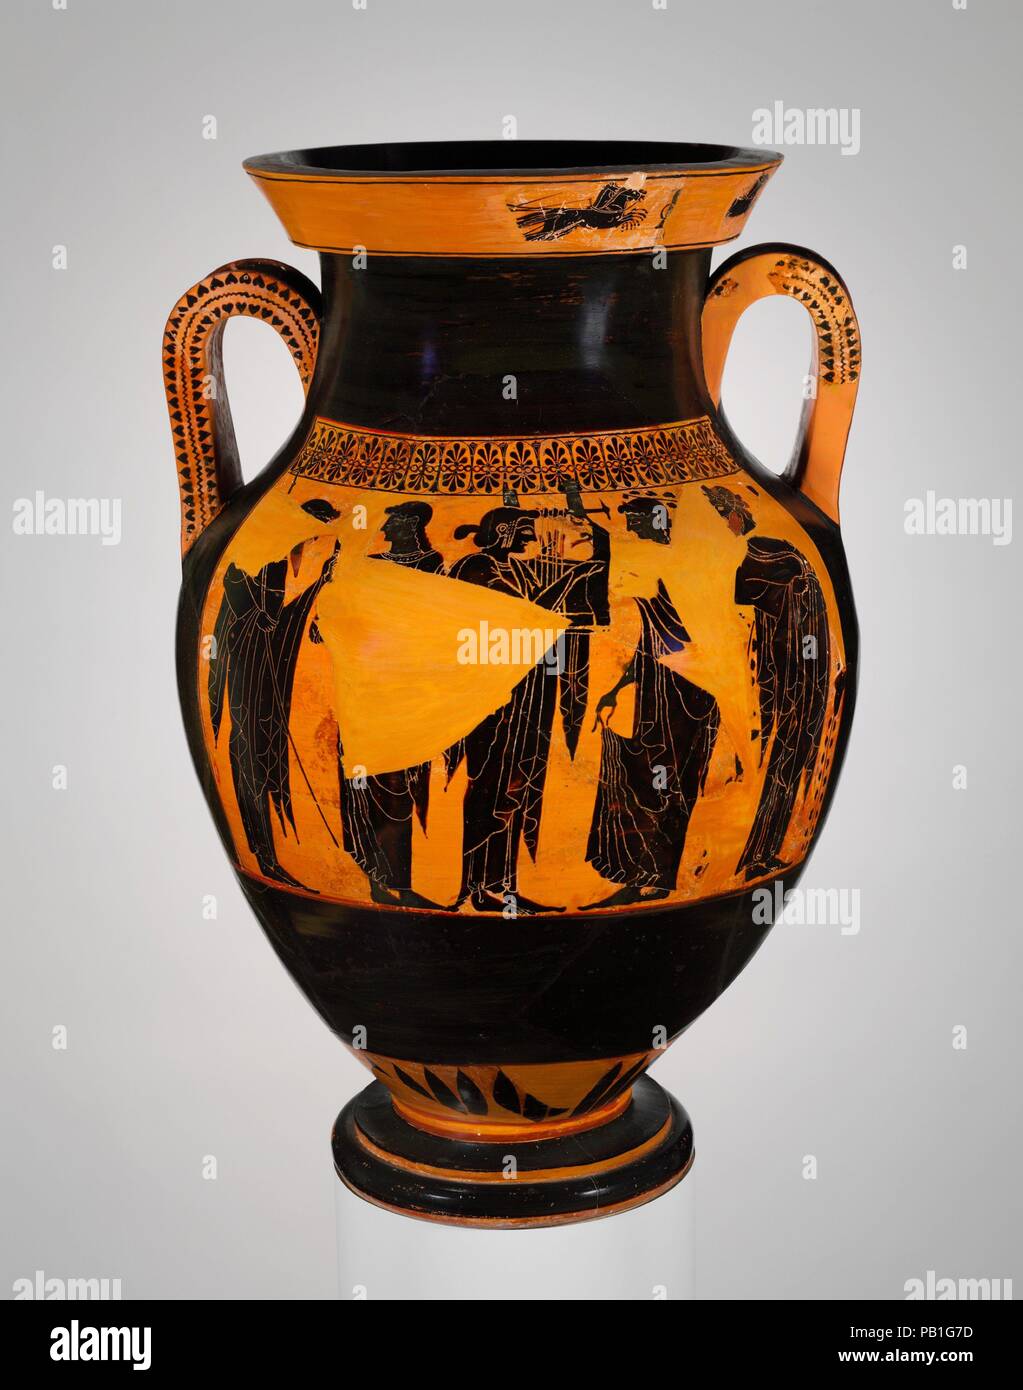 Terracotta amphora (jar). Culture: Greek, Attic. Dimensions: H. 26 in. (66 cm). Date: ca. 530-520 B.C..  Obverse, Athena and Herakles in the gigantomachy (battle of gods and giants)  Reverse, Poseidon, Leto, Apollo, Artemis, Dionysos  On the lip, obverse and reverse, chariot races  Of particular interest on this vase is the frieze of racing chariots on the lip. Subordinate bands of figural decoration were introduced at various times and on various shapes in Athenian vase-painting. At the end of the sixth century B.C. and in the early fifth, decoration on the lip occasionally appears, especiall Stock Photo